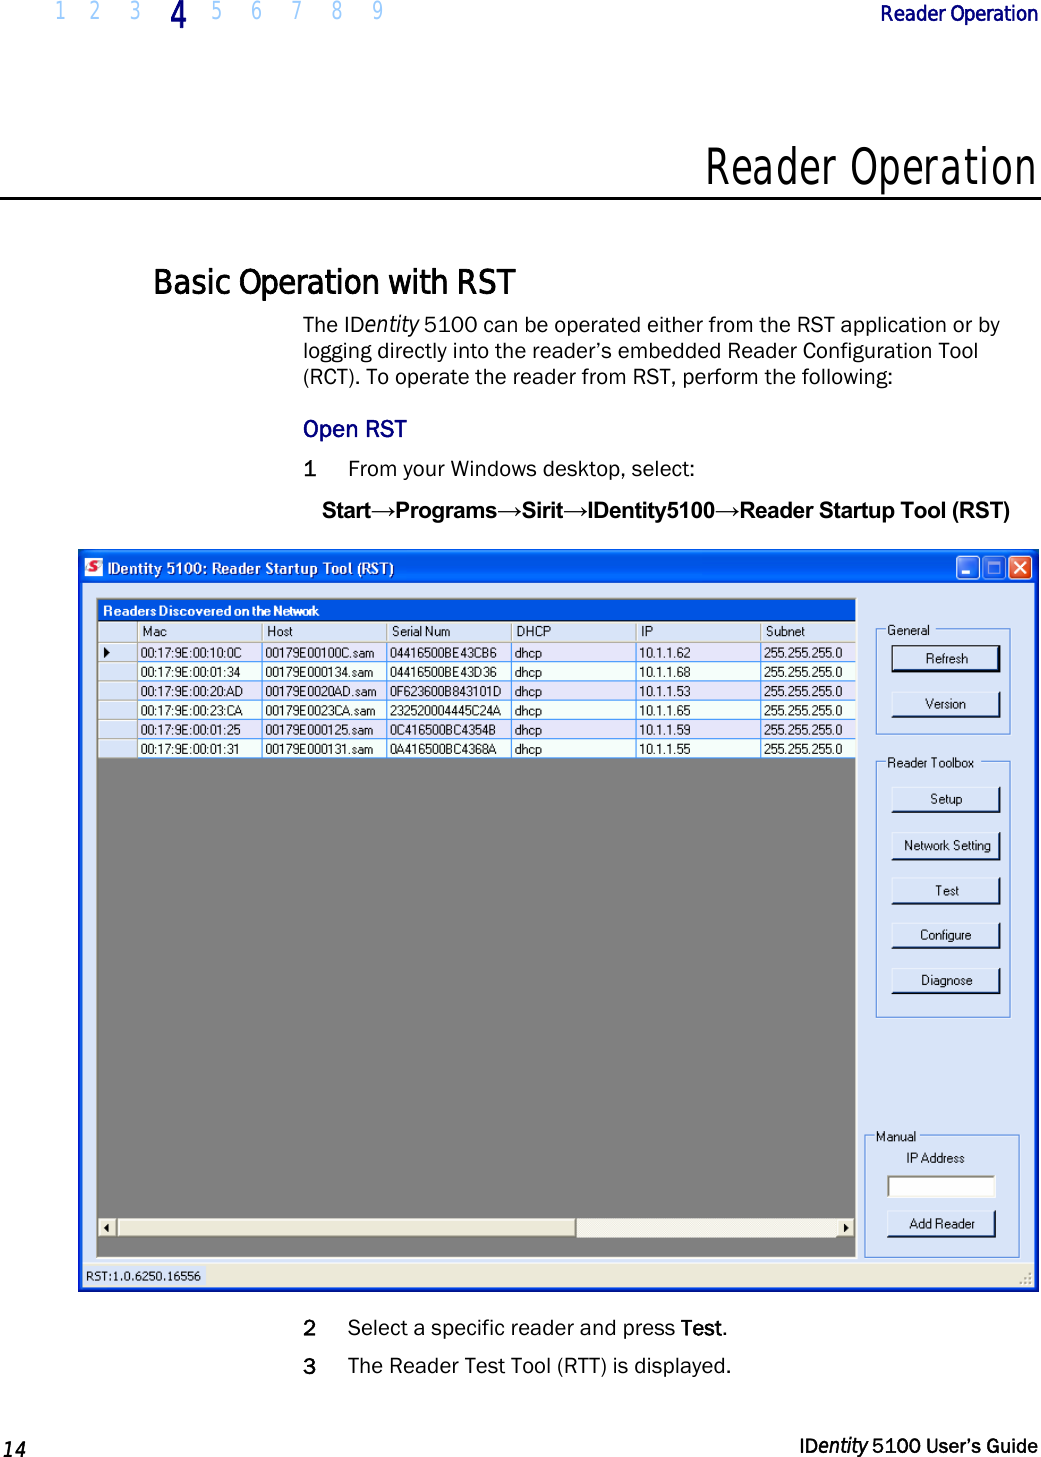  1 2  3 4 5 6 7 8 9       Reader Operation   14  IDentity 5100 User’s Guide  Reader Operation  Basic Operation with RST The IDentity 5100 can be operated either from the RST application or by logging directly into the reader’s embedded Reader Configuration Tool (RCT). To operate the reader from RST, perform the following: Open RST 1 From your Windows desktop, select: Start→Programs→Sirit→IDentity5100→Reader Startup Tool (RST)  2 Select a specific reader and press Test.  3 The Reader Test Tool (RTT) is displayed. 